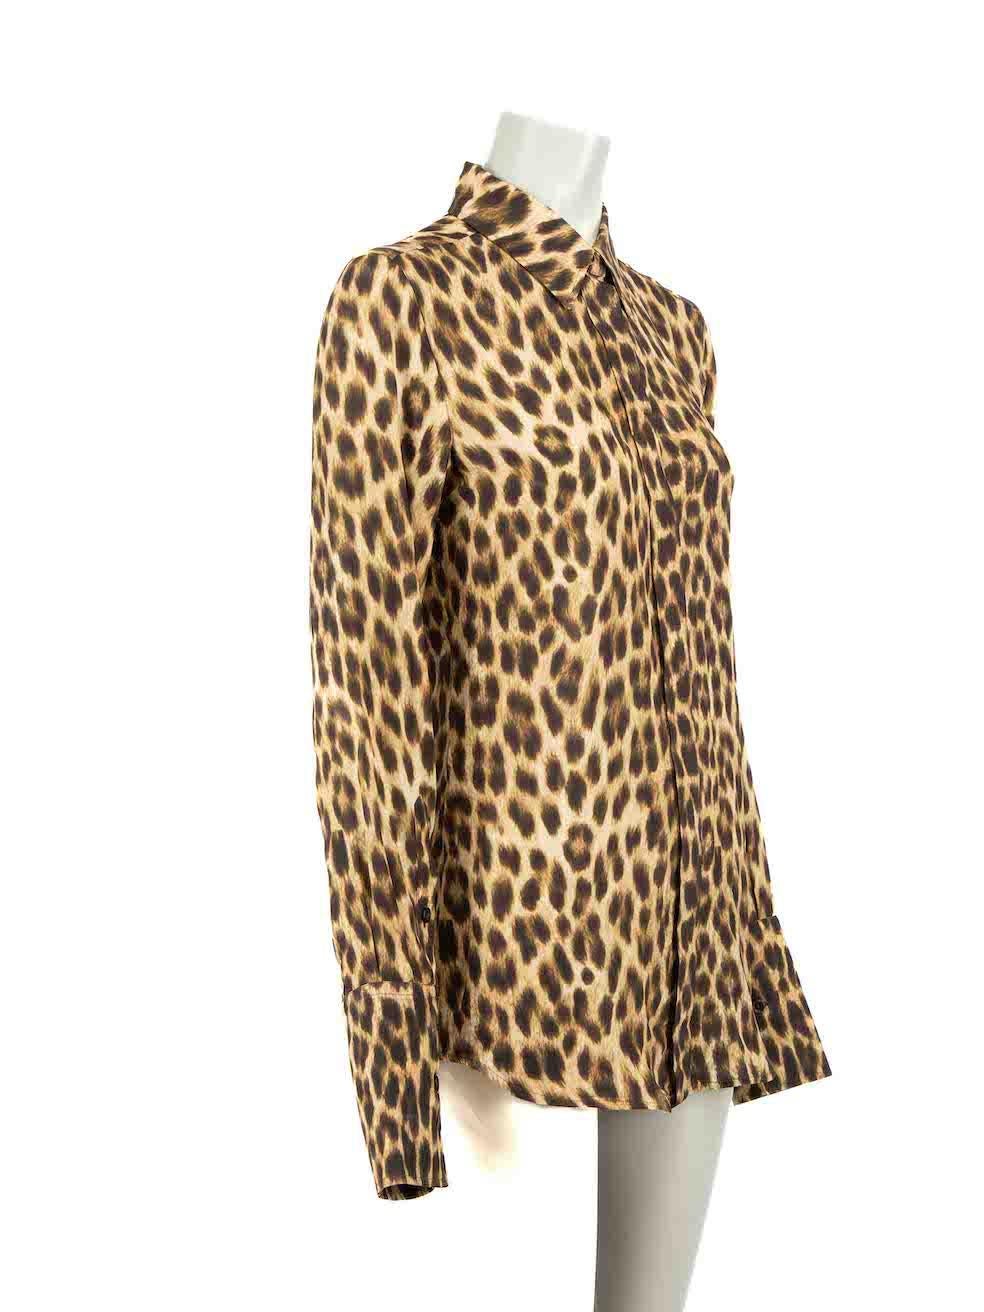 CONDITION is Very good. Minimal wear to shirt is evident. Minimal wear with the composition and size label missing on this used Sportmax designer resale item.
 
Details
Brown
Silk
Long sleeves blouse
Leopard print pattern
Front button up